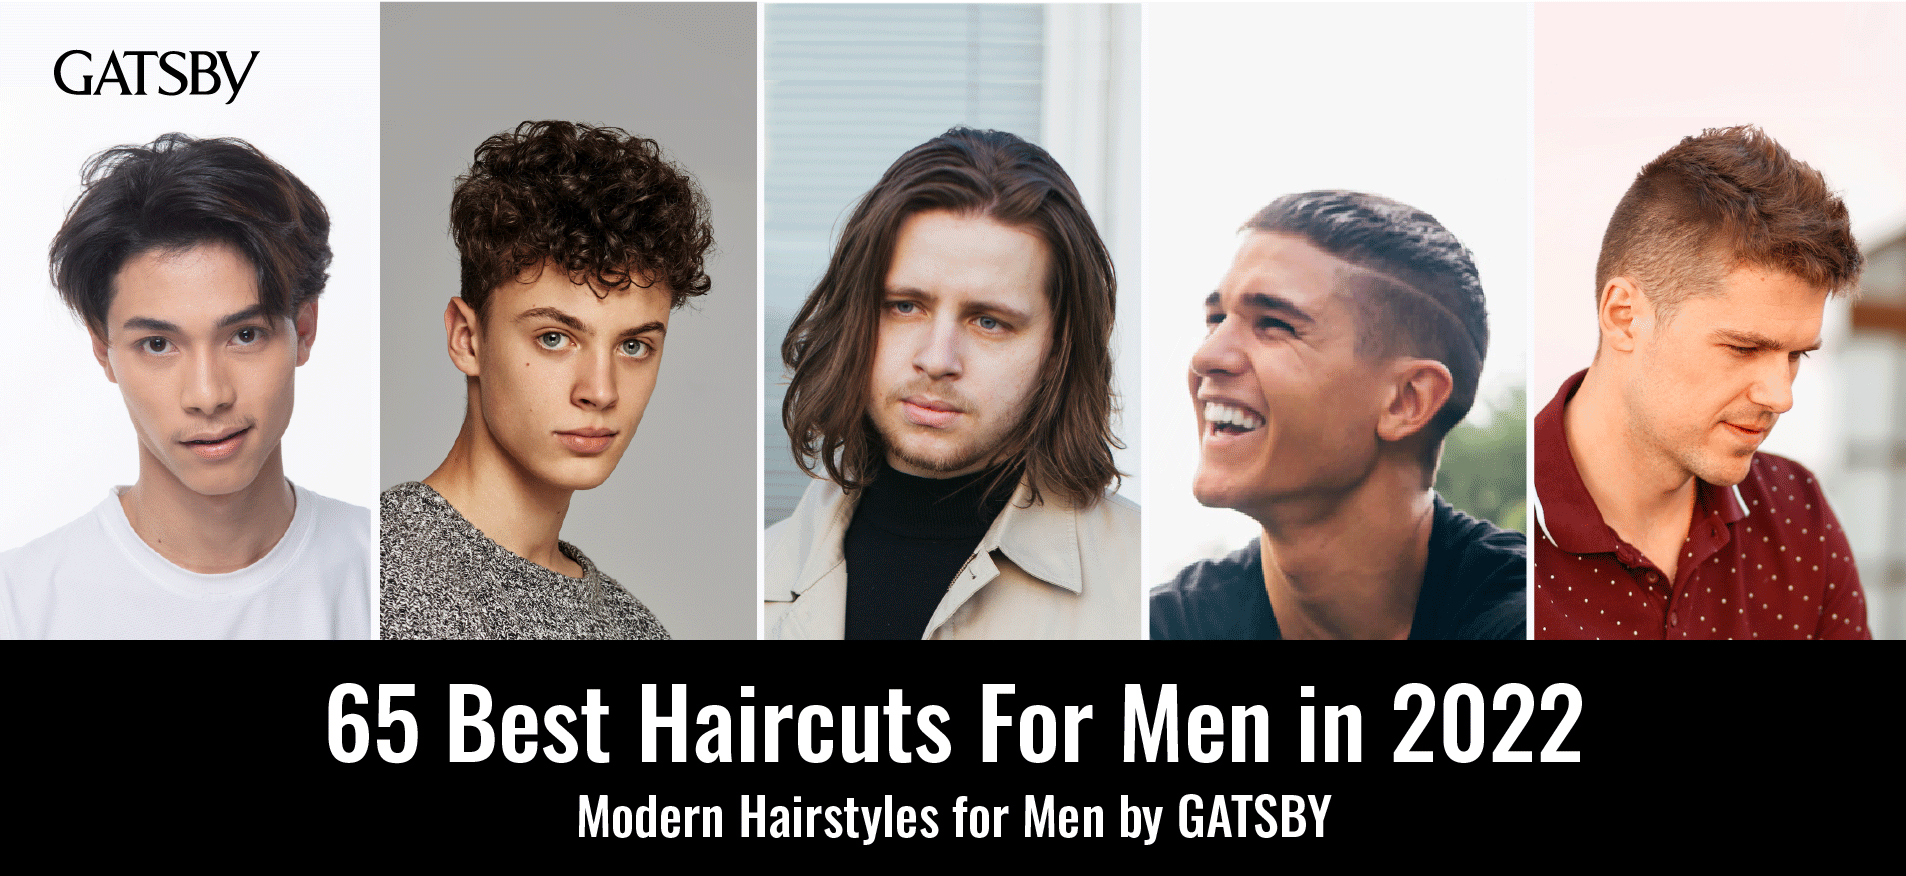 GATSBY | 65 Best Haircuts for Men in 2022